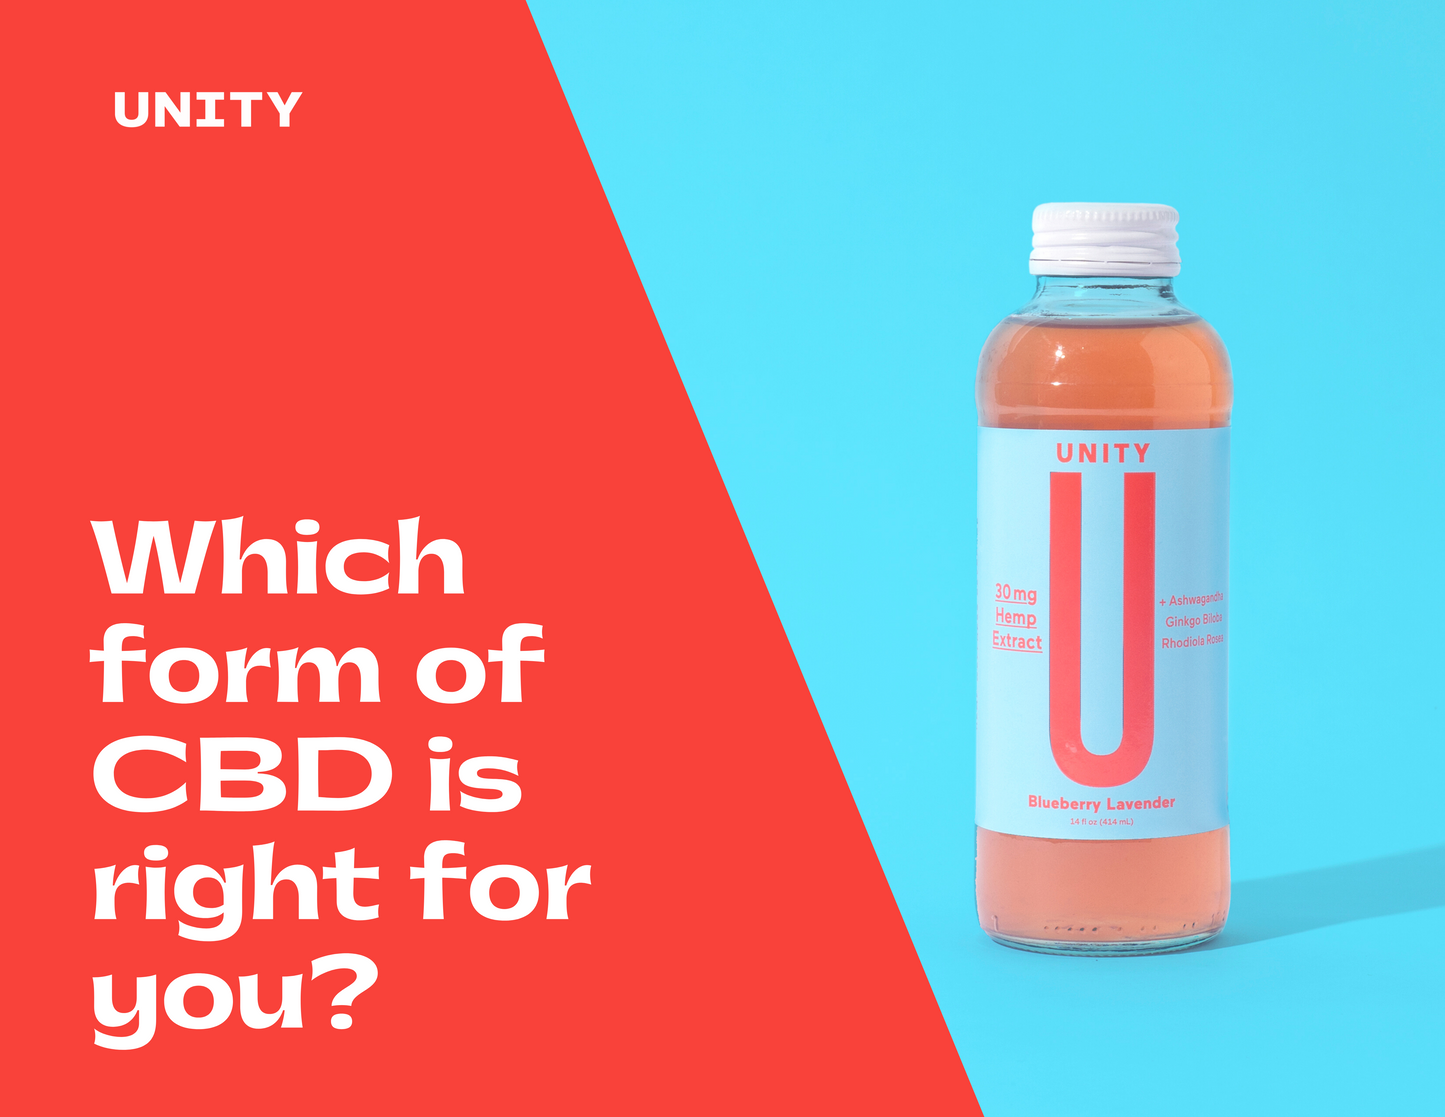 cbd-drink-effects-unity-wellness-co-which-form-of-cbd-is-right-for-you